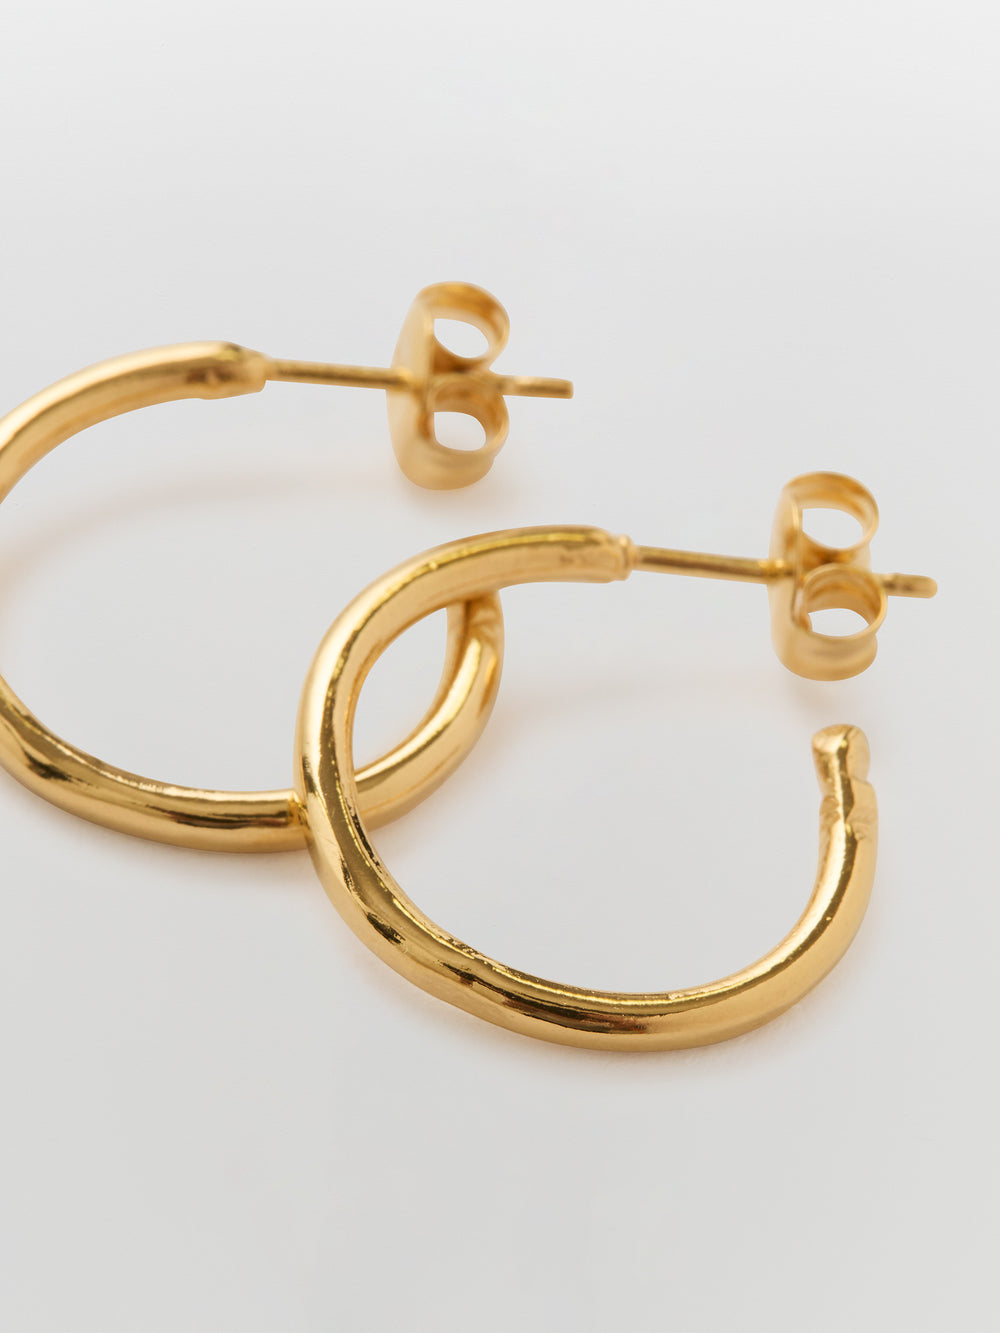 released from love 004 classic gold hoops